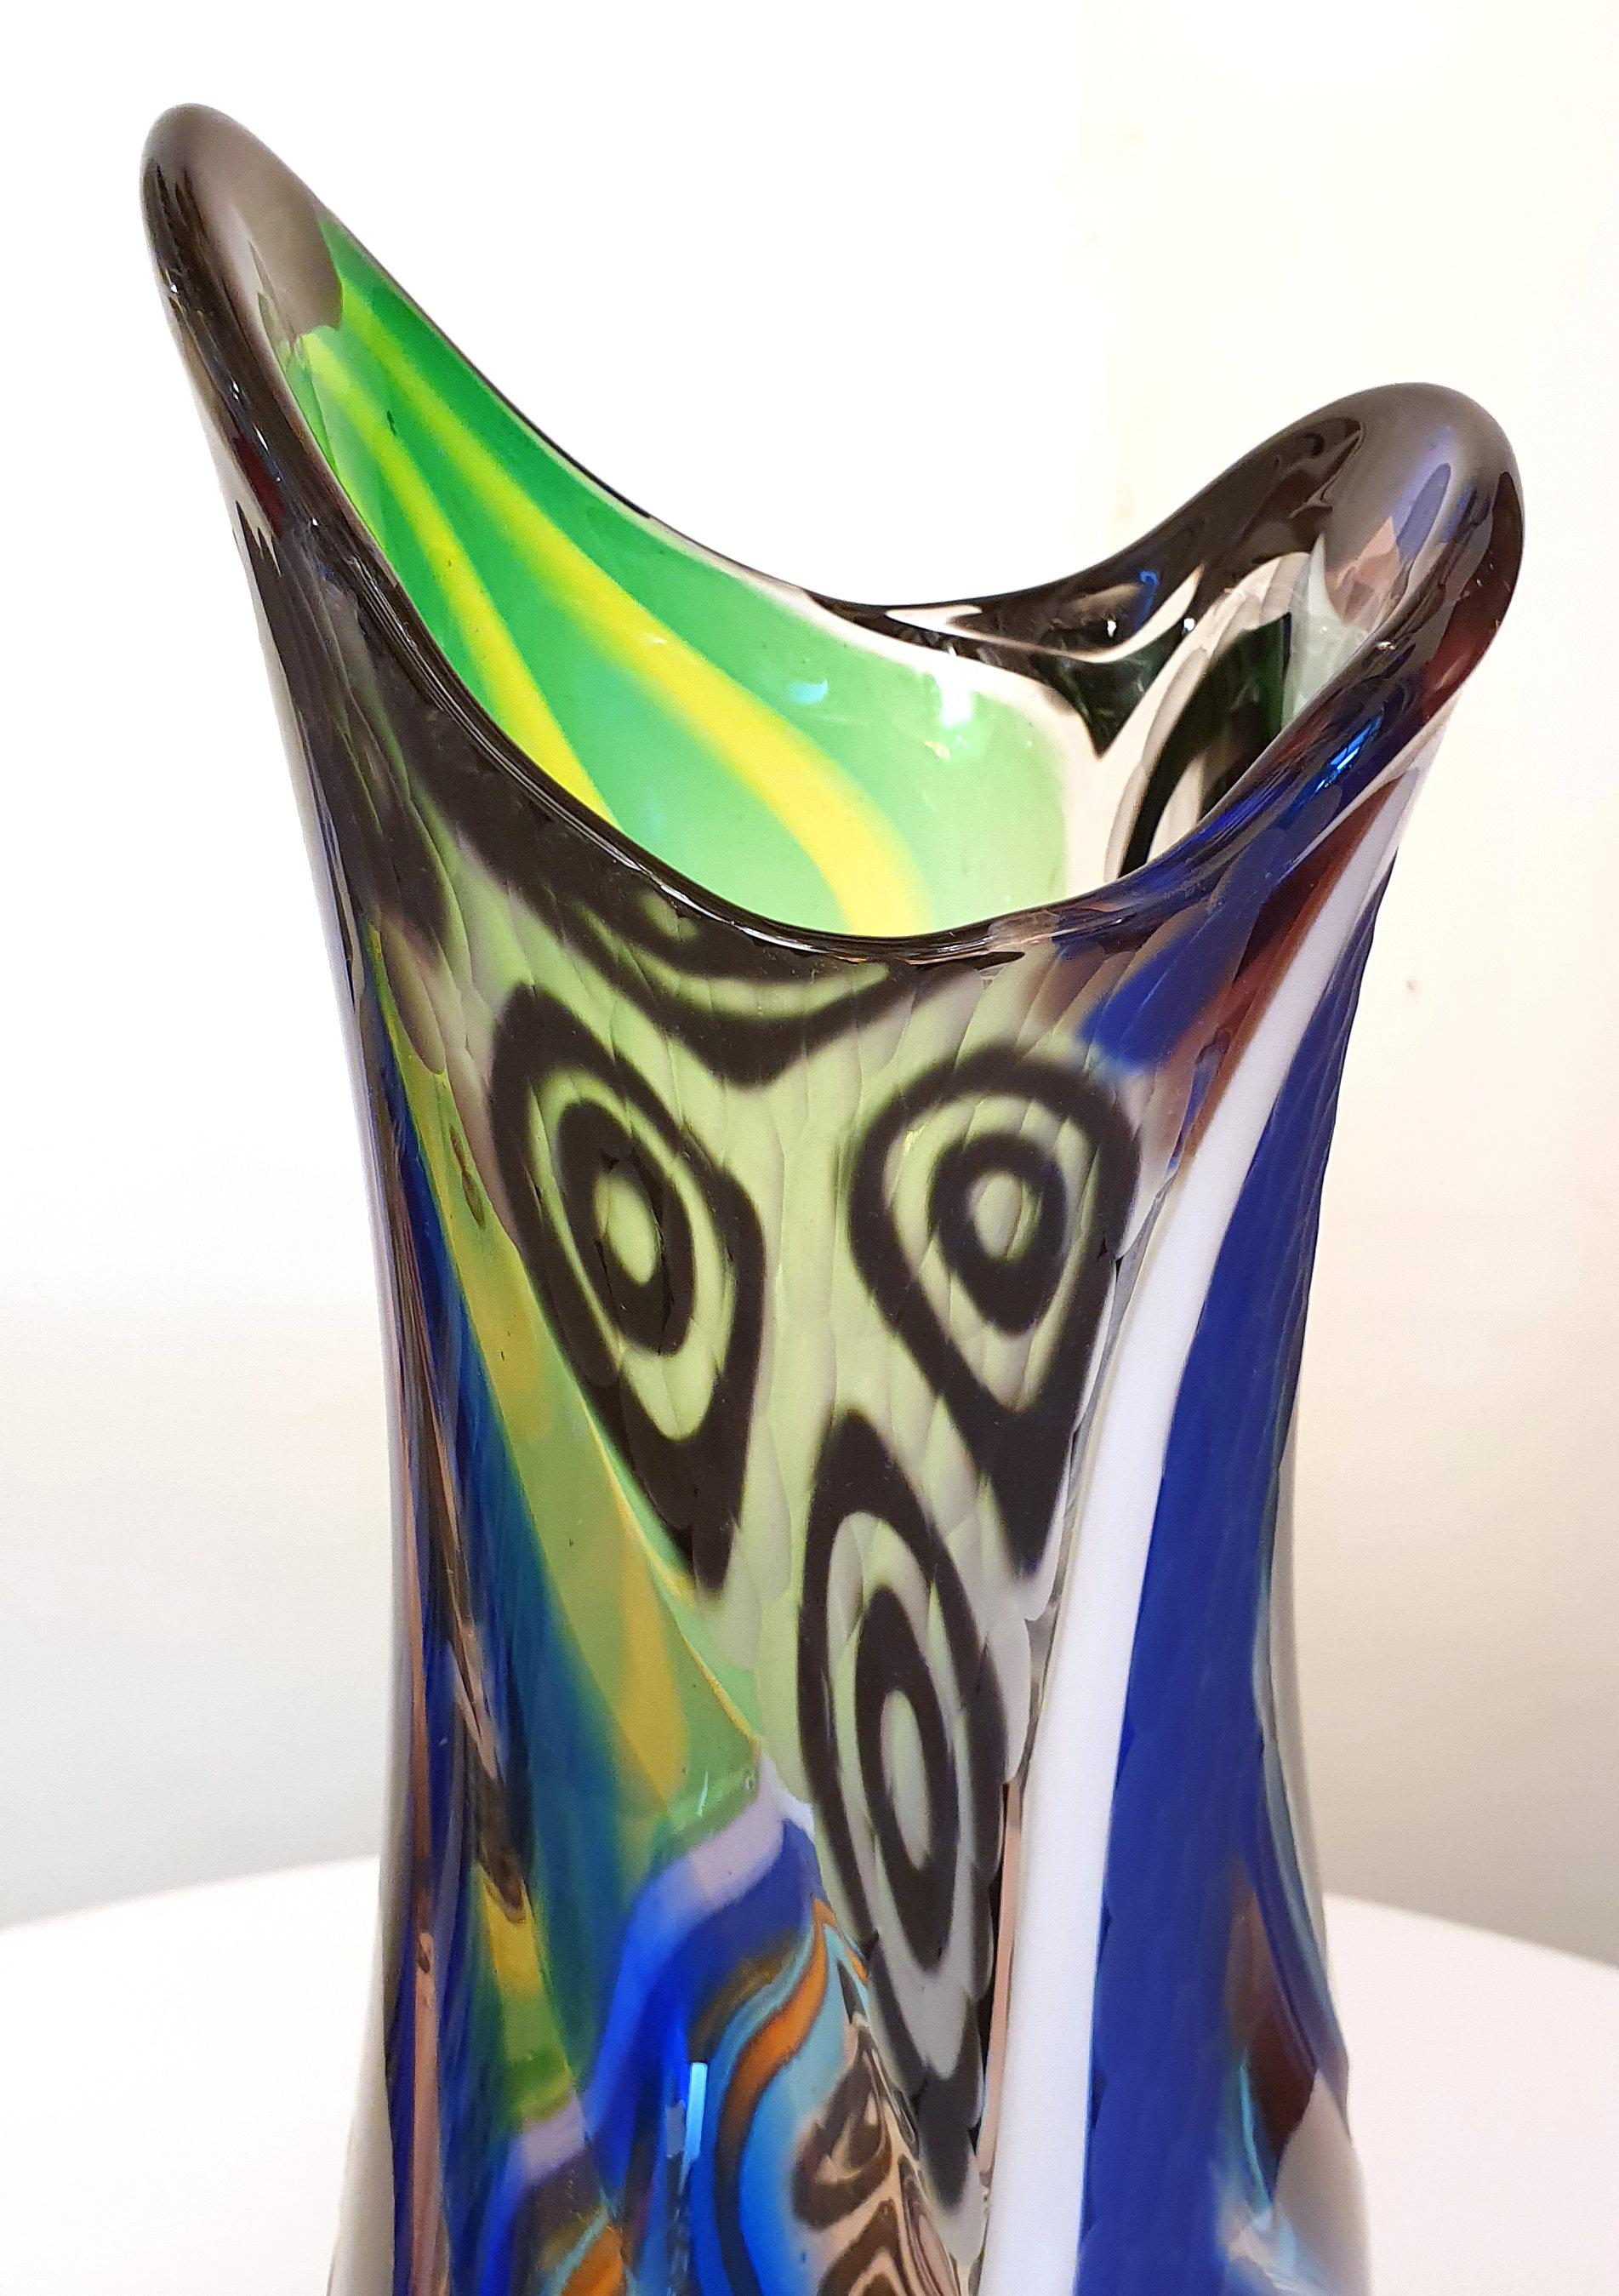 Lino Tagliapietra Murano Glass Vase Signed by the Artist In Good Condition For Sale In London, GB